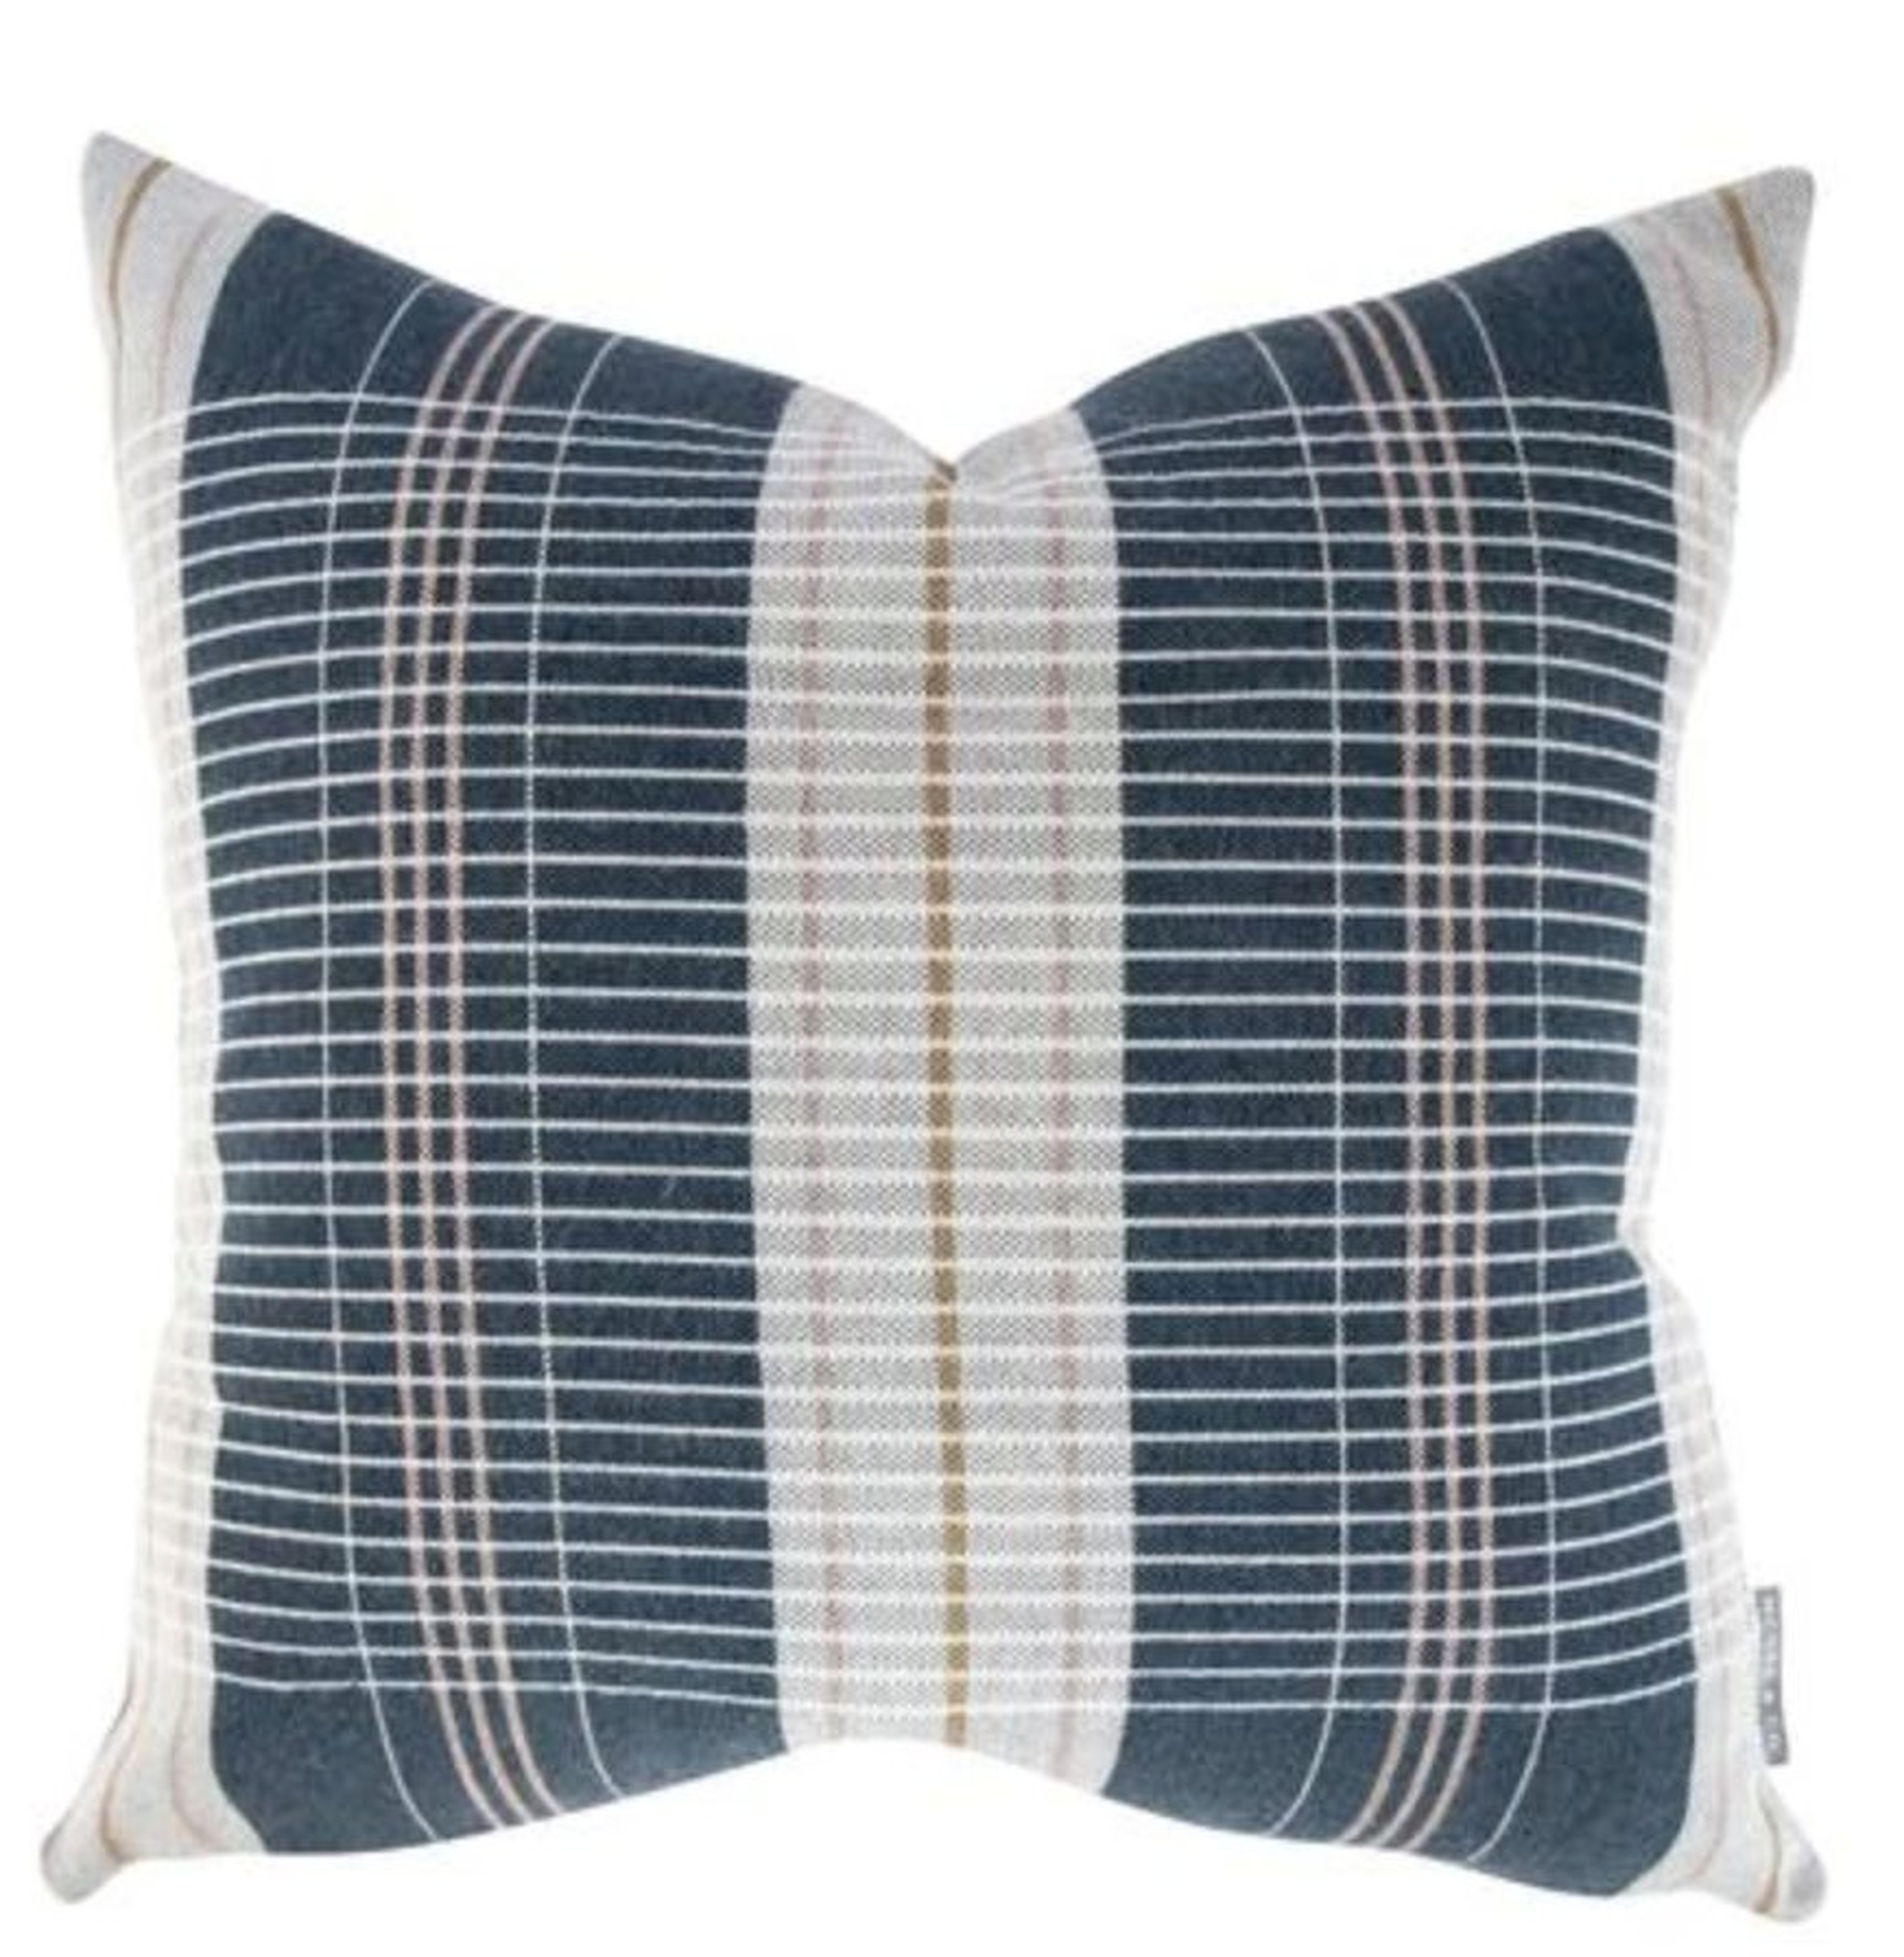 OXFORD WOVEN PLAID PILLOW COVER / 20" x 20" - McGee & Co.